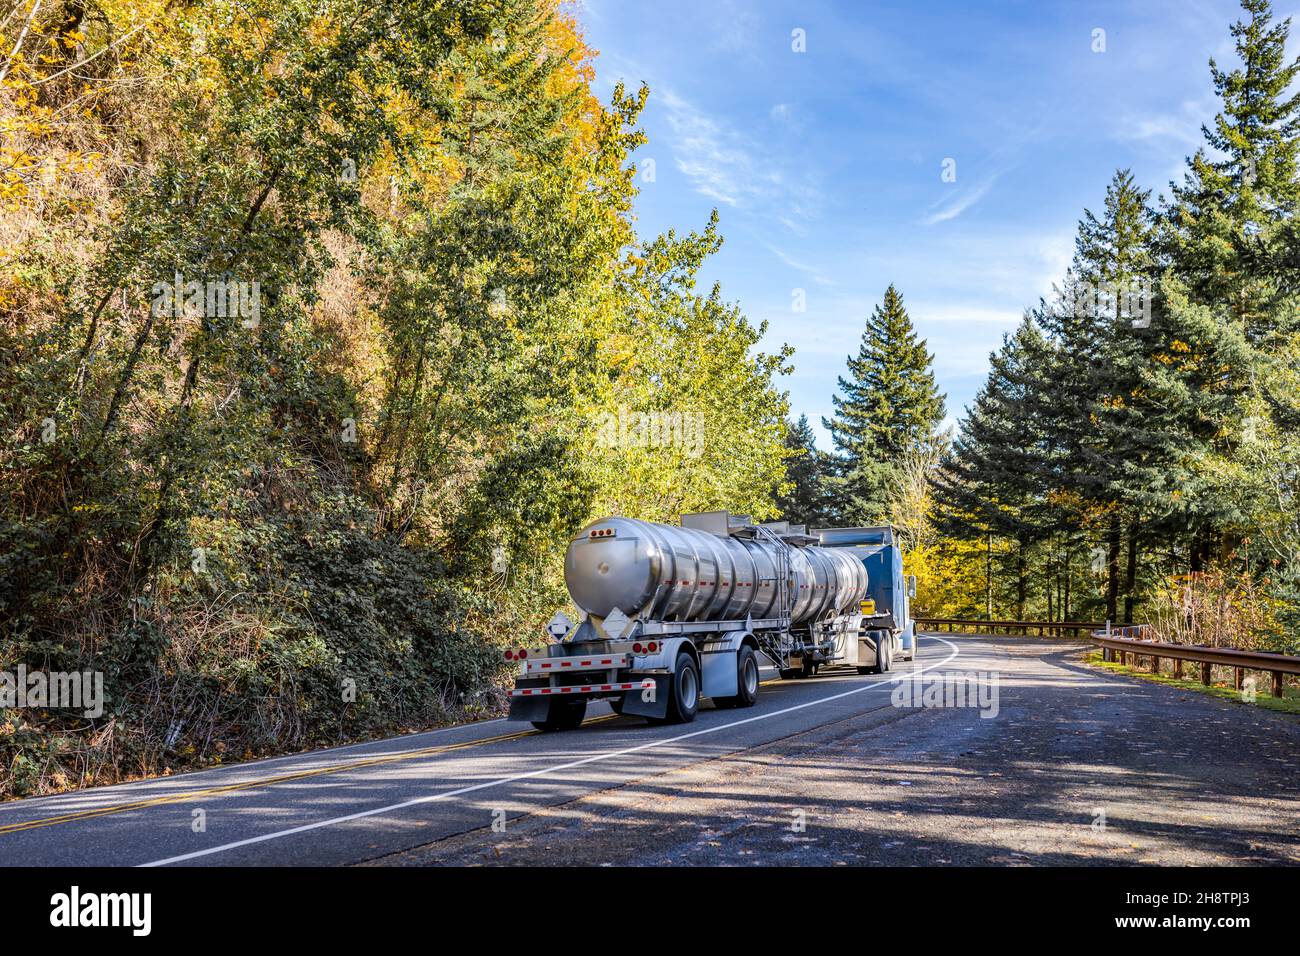 Industrial big rig blue semi truck tractor transporting commercial cargo in armored tank semi trailer driving on the narrow winding highway road with Stock Photo